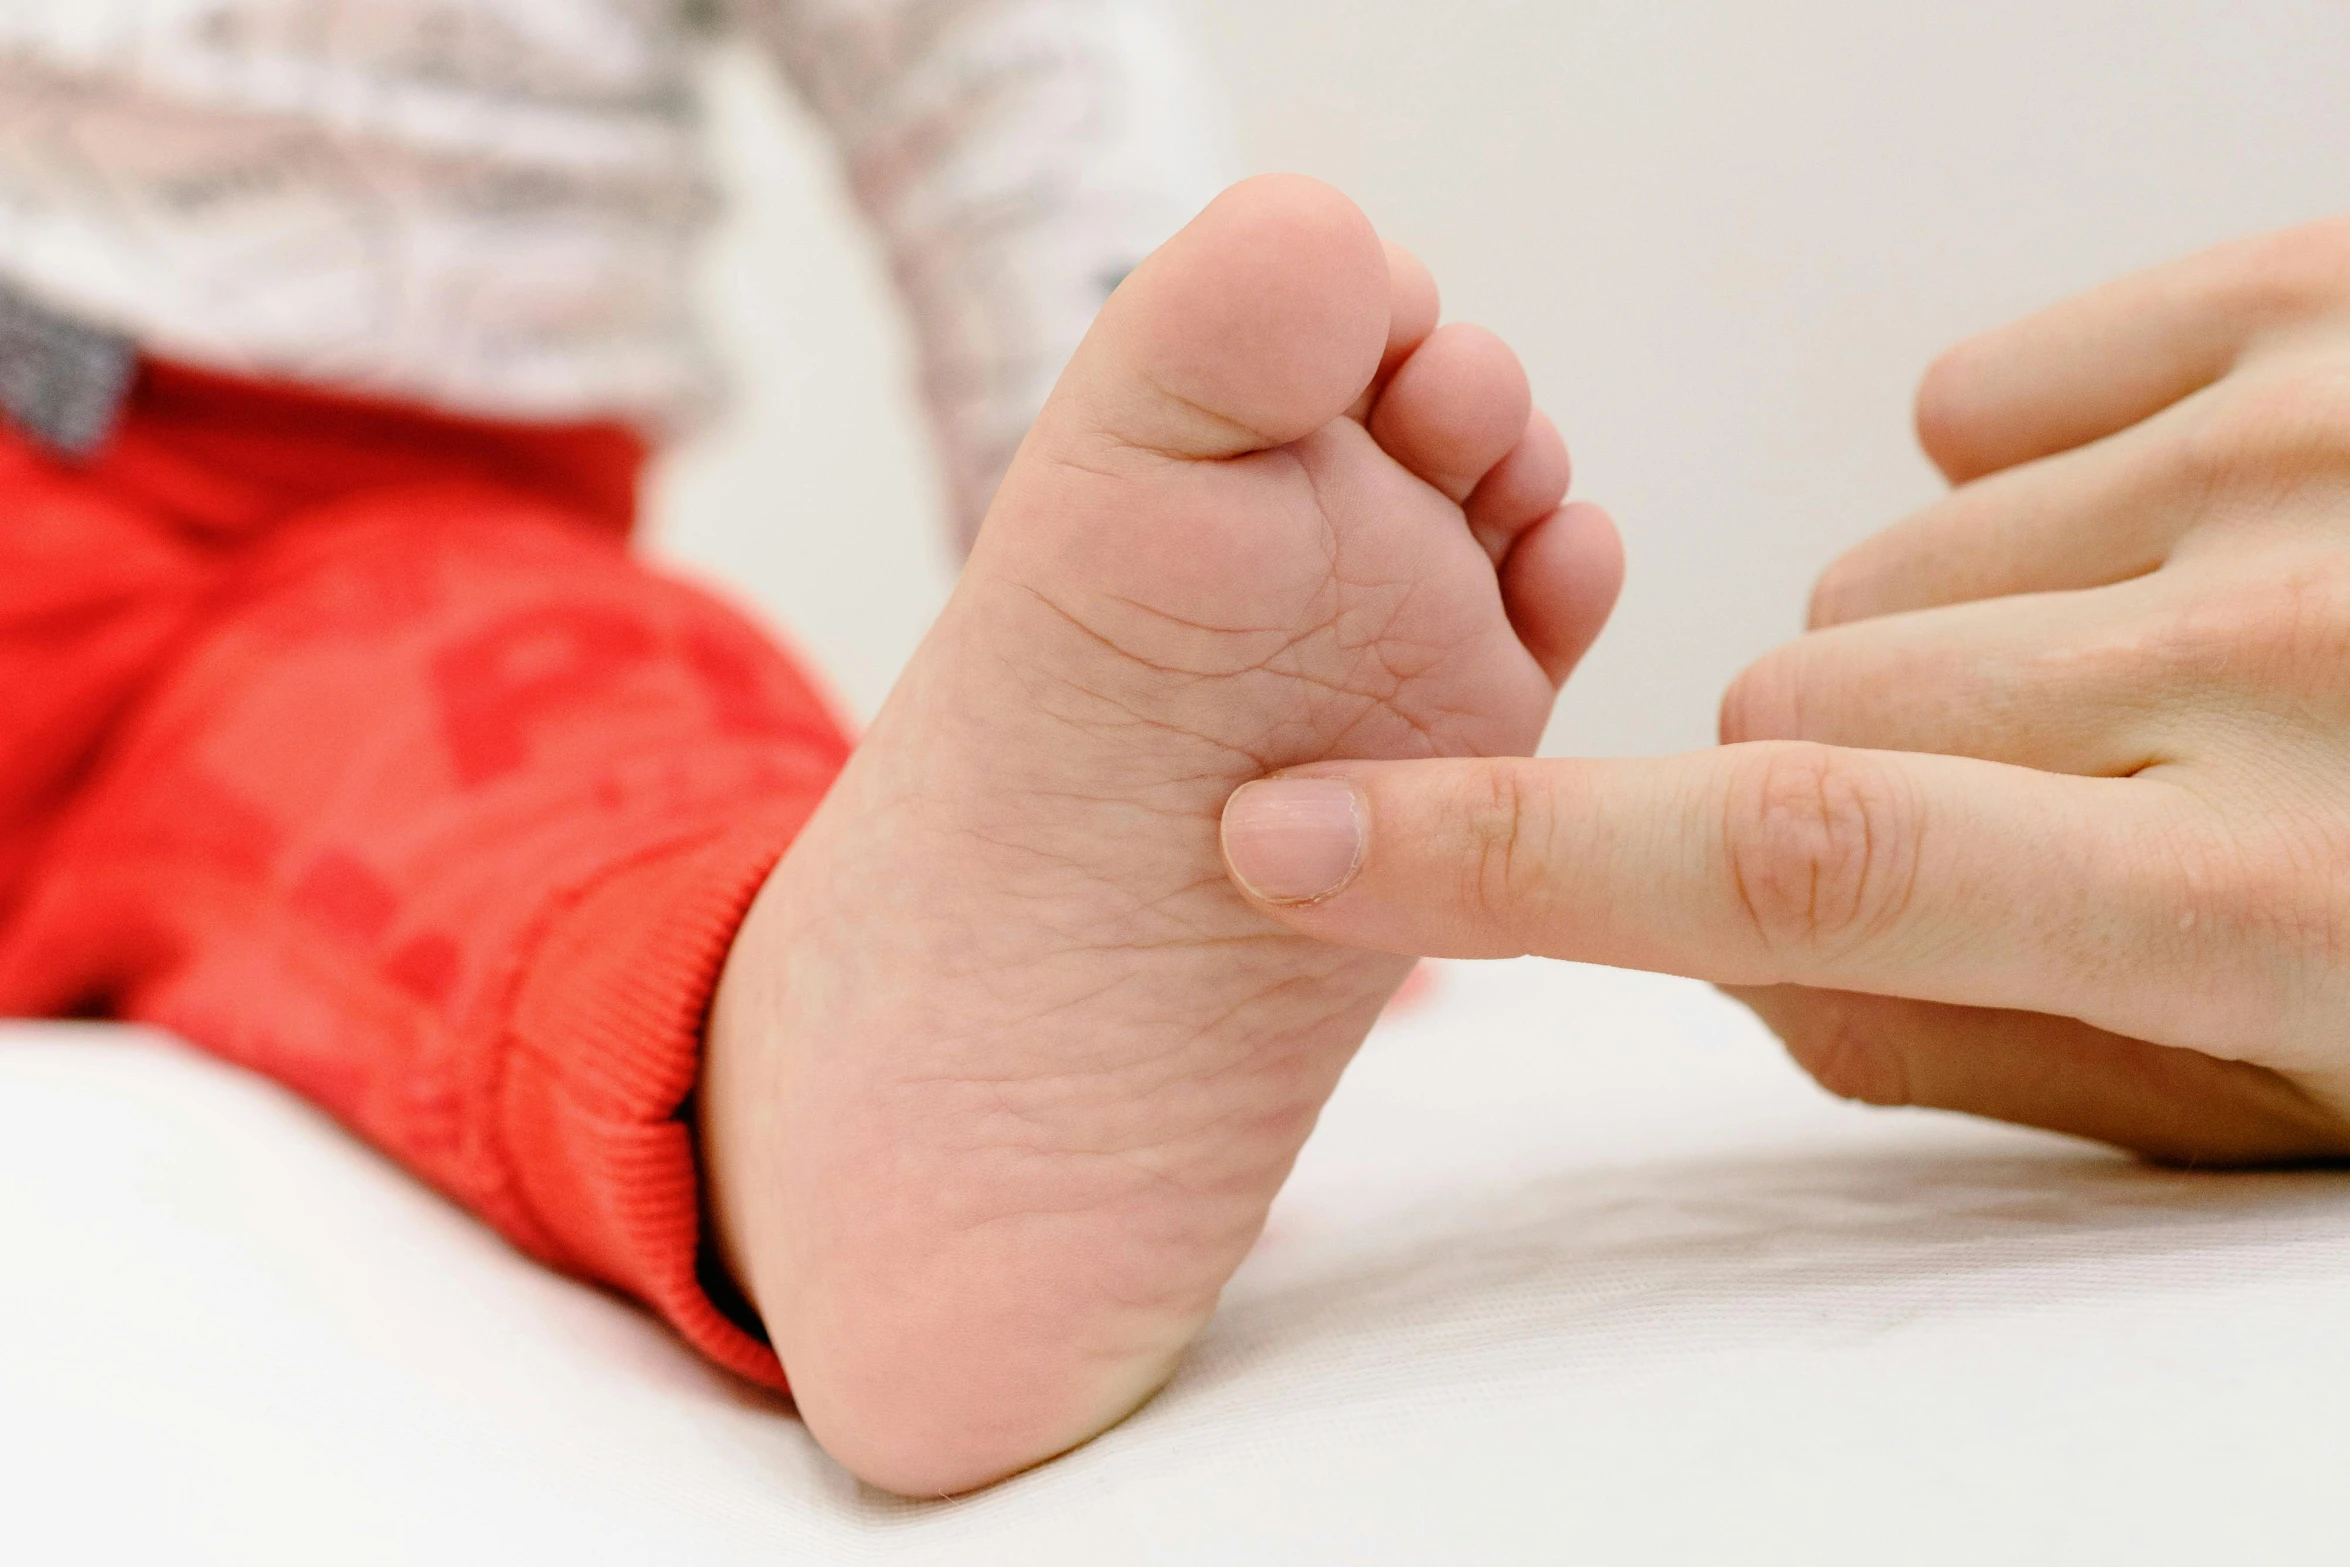 a close up of a person holding a baby's foot, with index finger, balance, very professional, scratchy